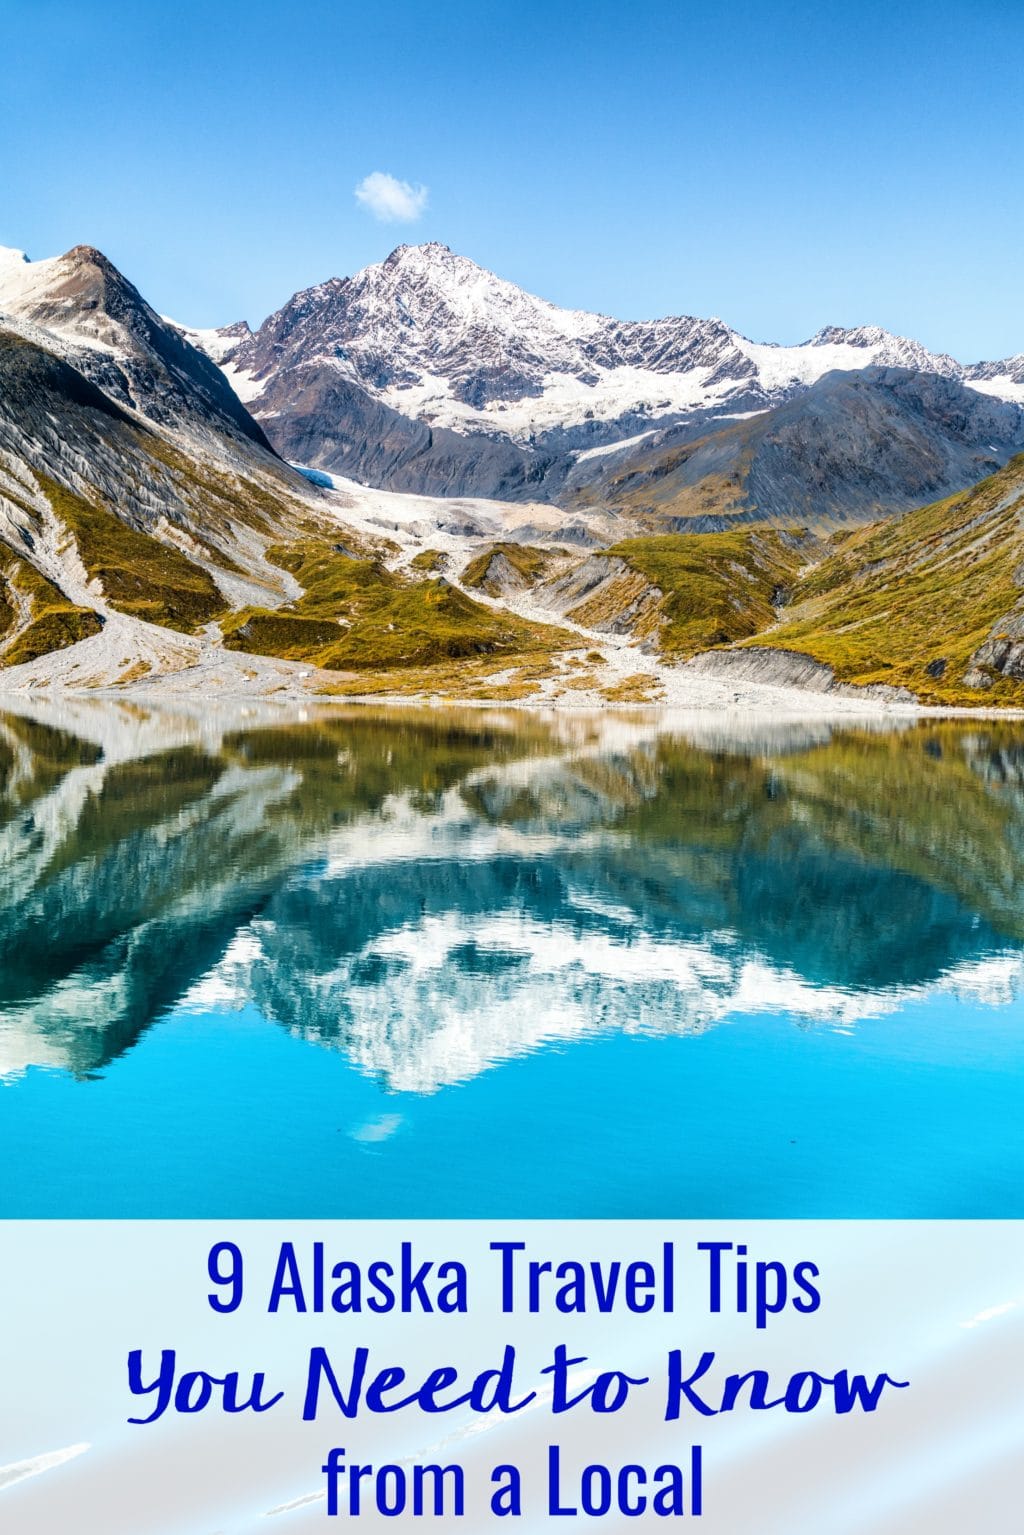 9 Alaska Travel Tips You Need to Know from a Local